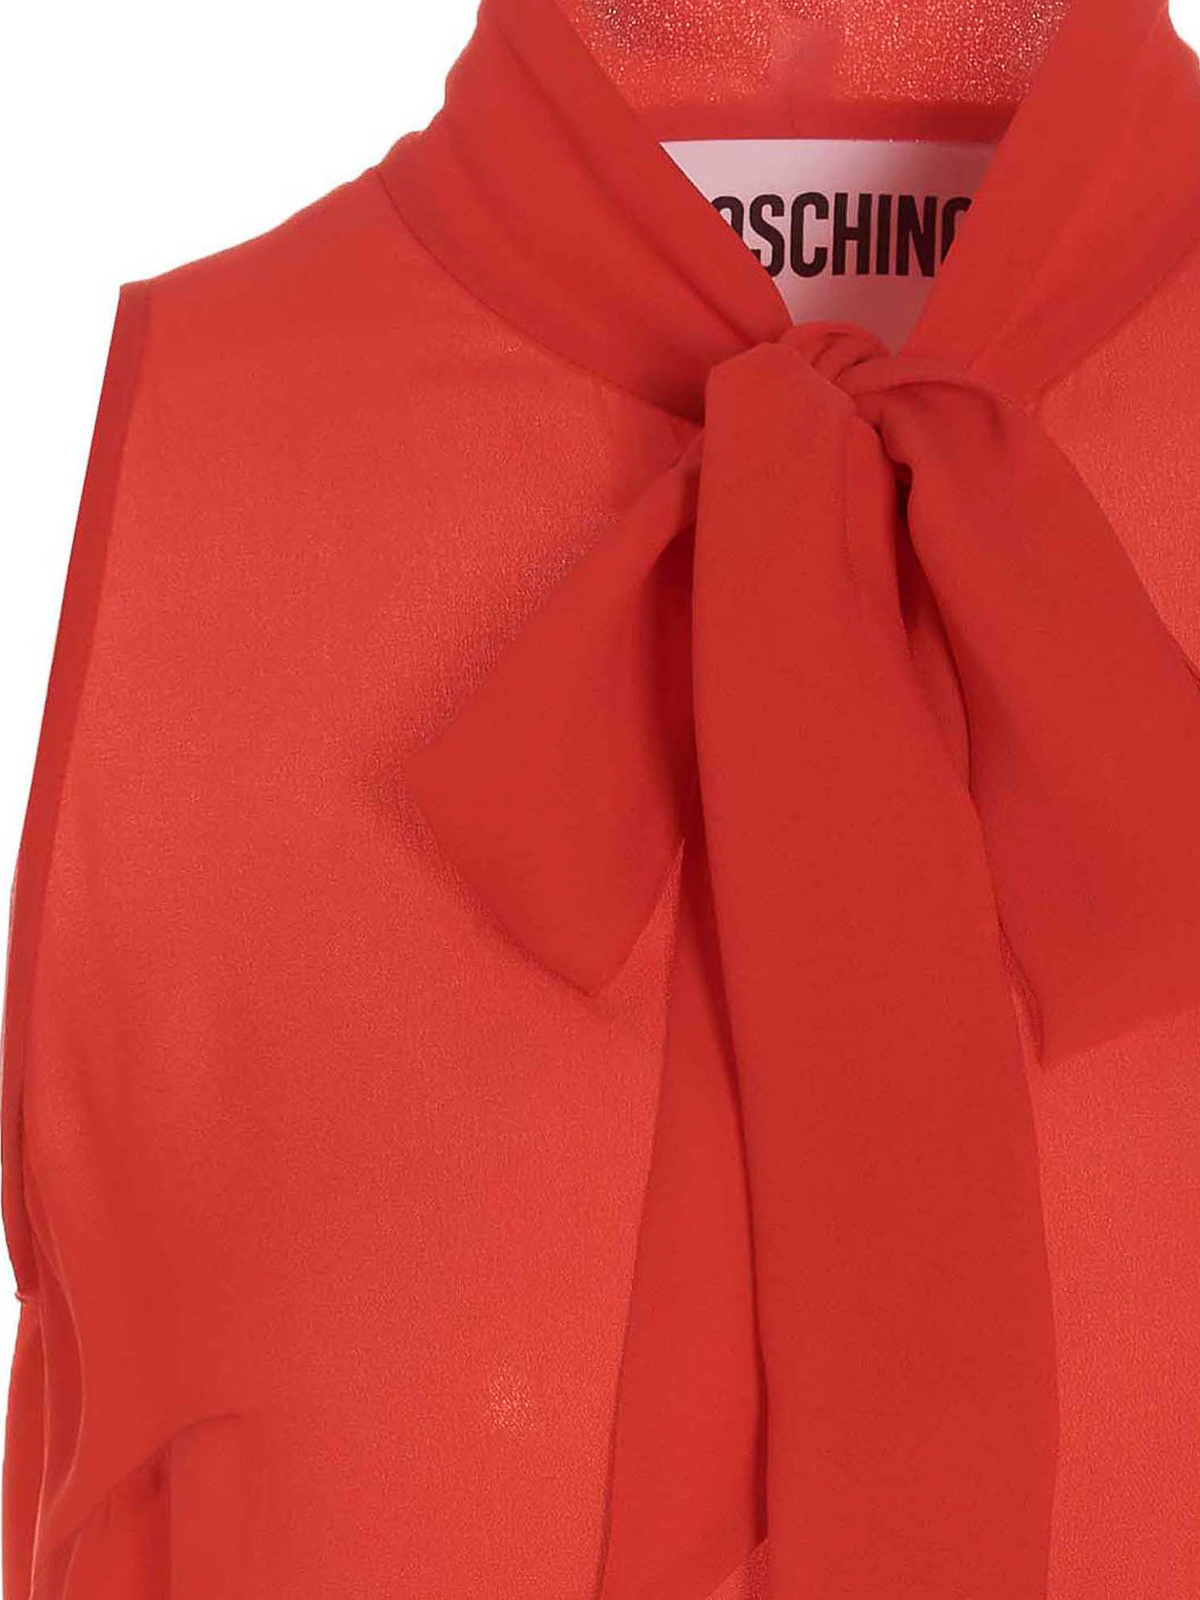 Shop Moschino Blouse With Sleeveless Style In Rojo